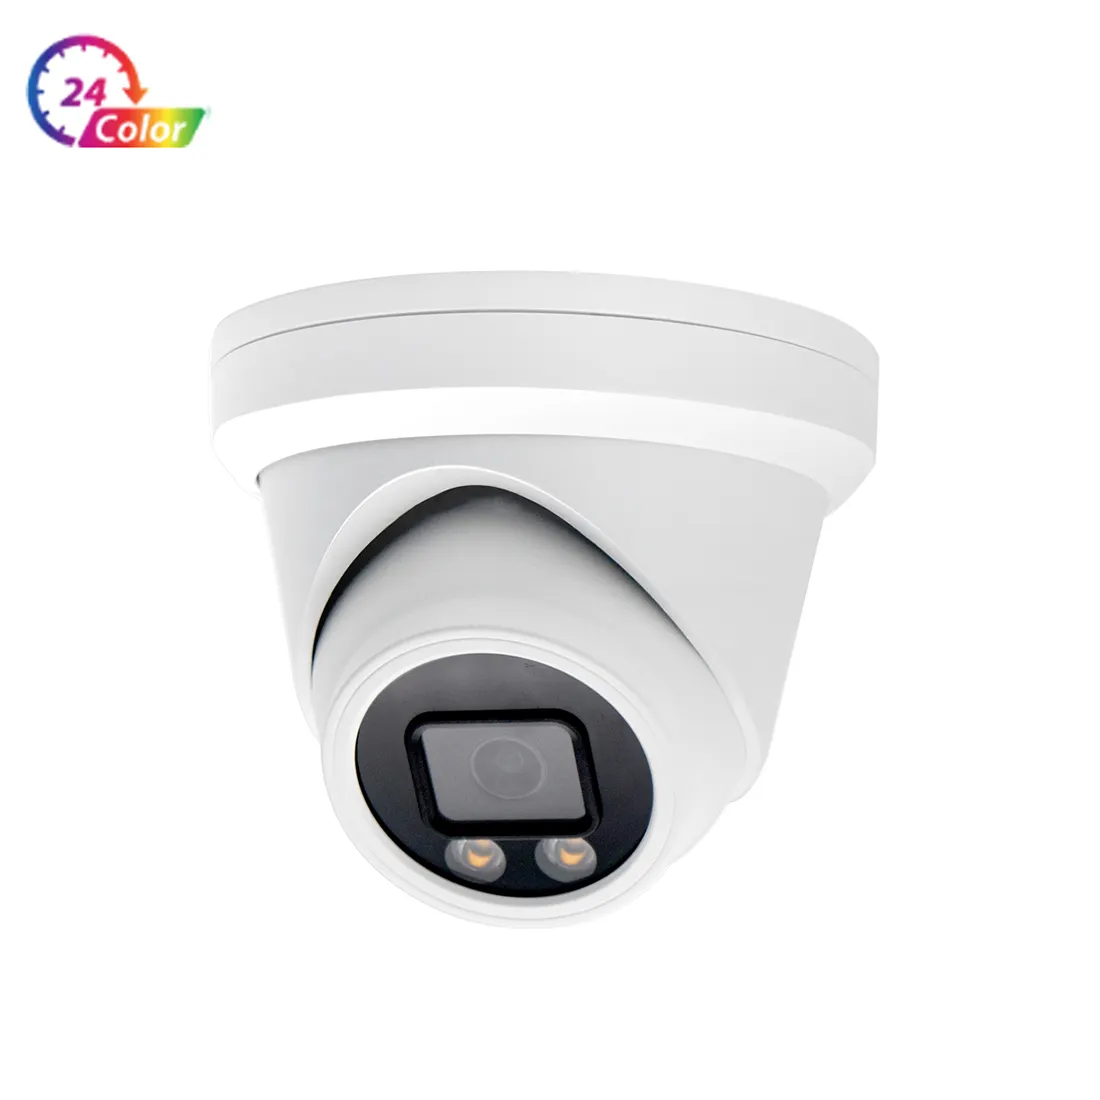 5MP 6MP ColorVu fixed ir turret dome network ip poe camera audio night vision full color 2.8mm F1.0 Lens